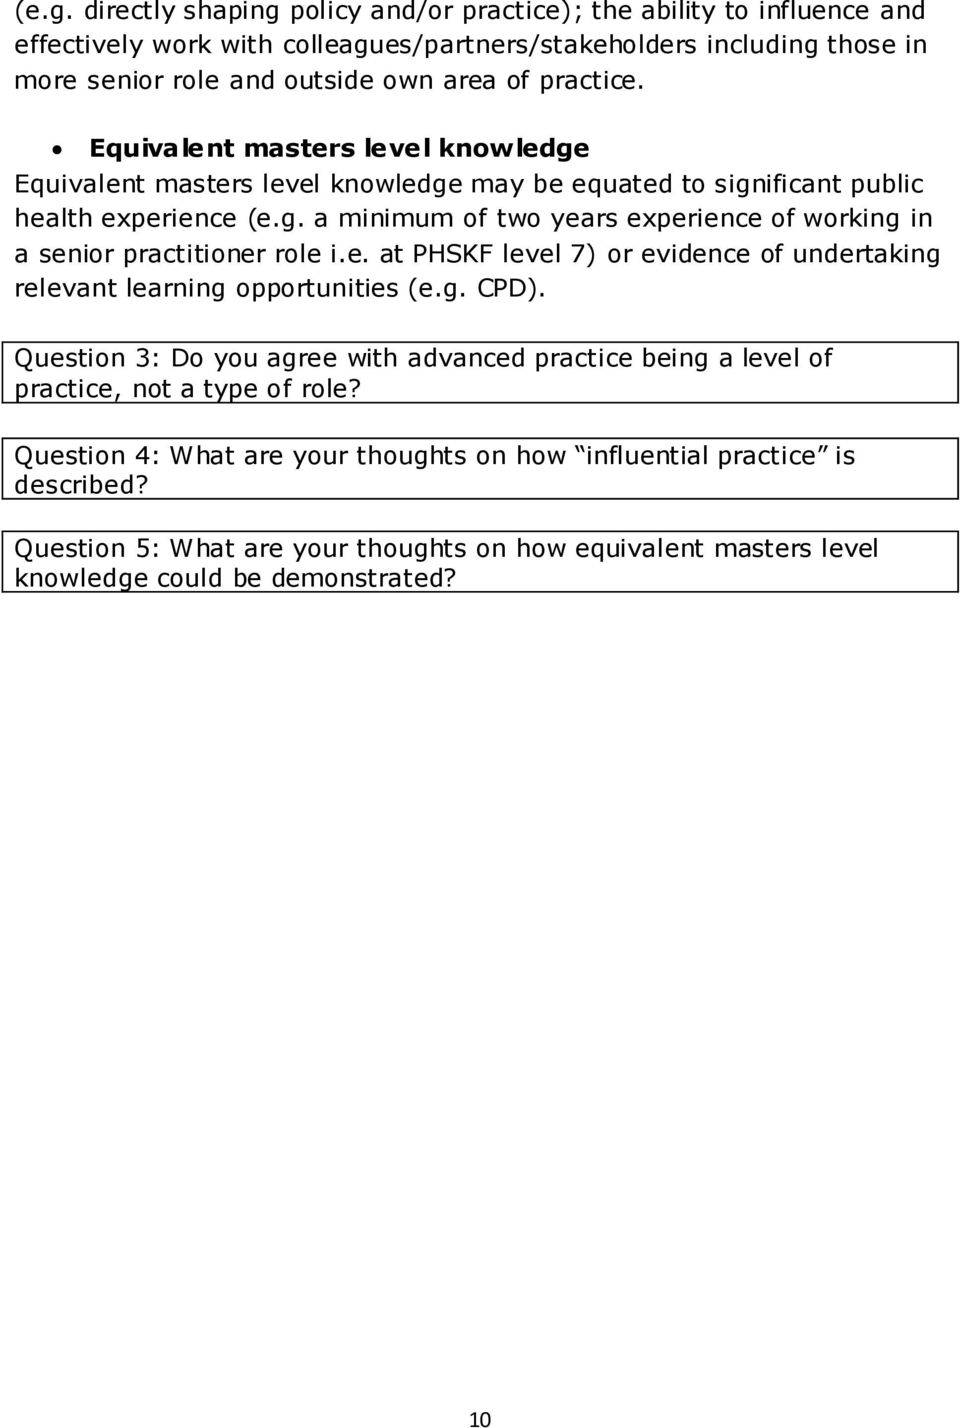 e. at PHSKF level 7) or evidence of undertaking relevant learning opportunities (e.g. CPD). Question 3: Do you agree with advanced practice being a level of practice, not a type of role?